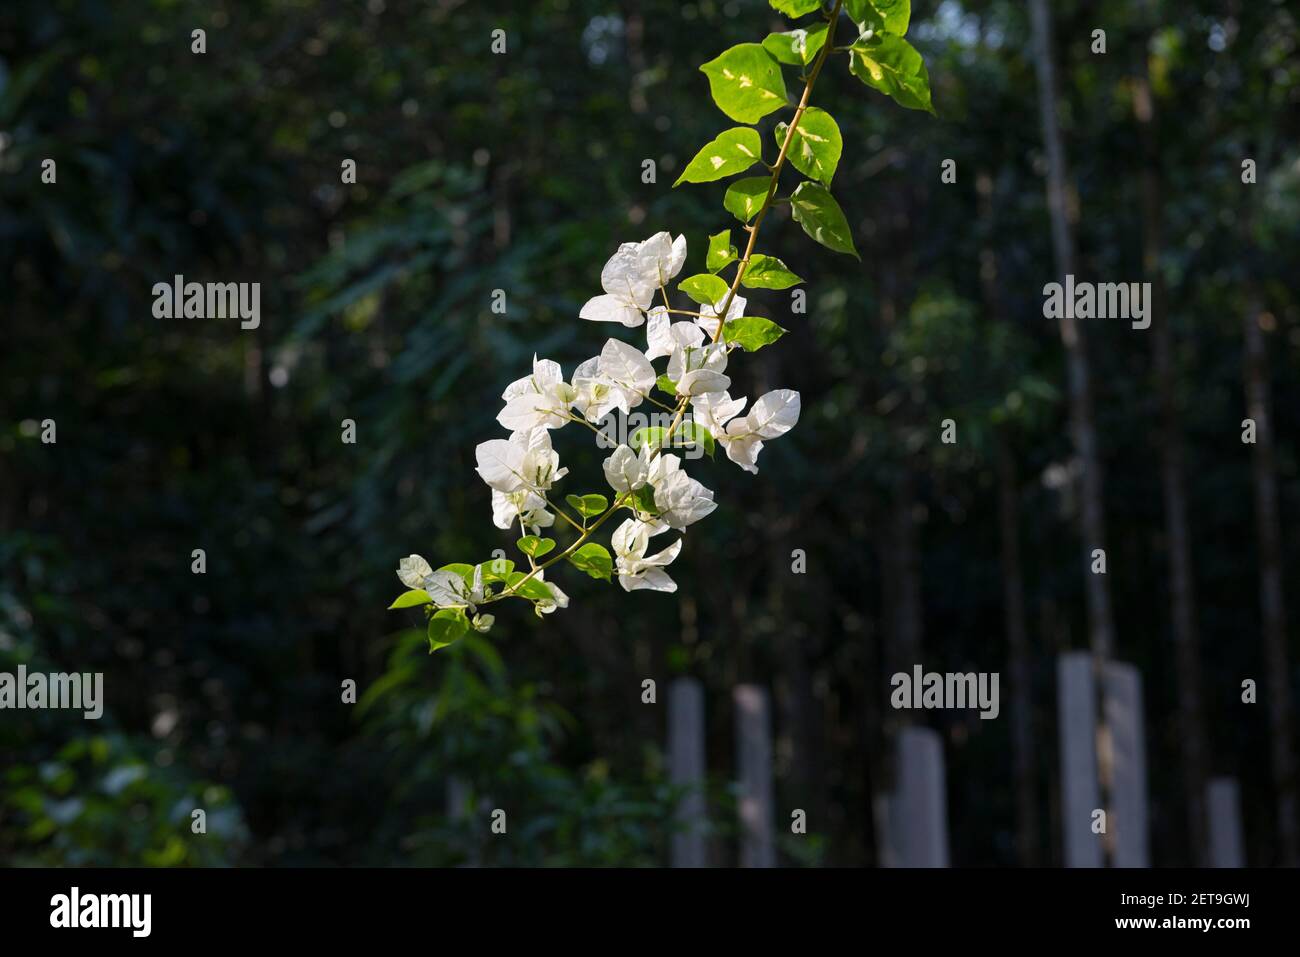 Bangladesh is a land of different types of flowers and tree. Stock Photo